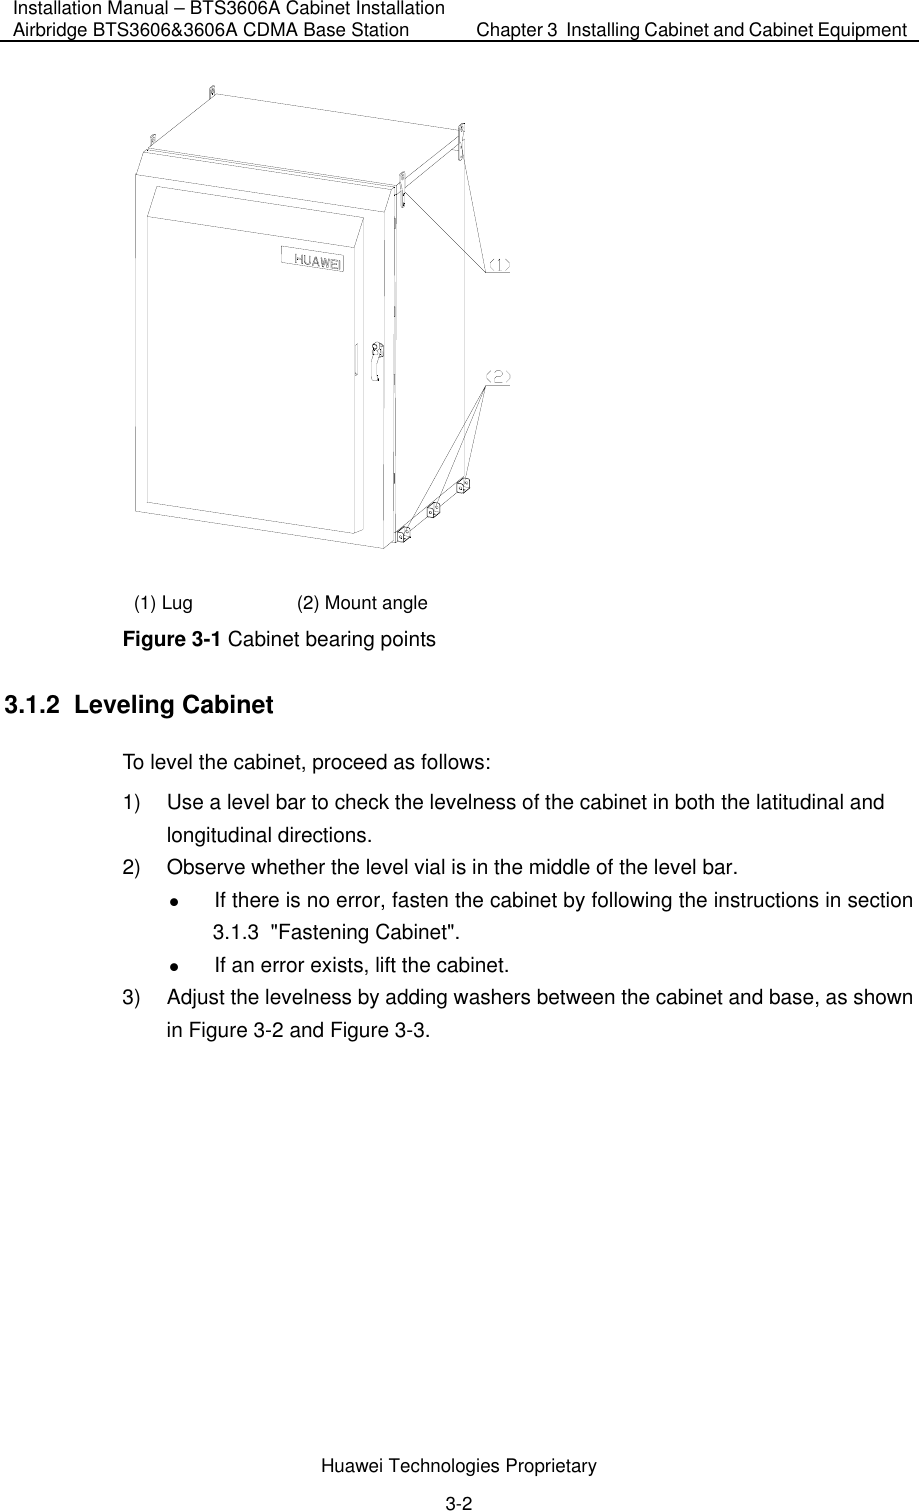 Installation Manual – BTS3606A Cabinet Installation Airbridge BTS3606&amp;3606A CDMA Base Station  Chapter 3  Installing Cabinet and Cabinet Equipment  Huawei Technologies Proprietary 3-2  (1) Lug  (2) Mount angle Figure 3-1 Cabinet bearing points 3.1.2  Leveling Cabinet To level the cabinet, proceed as follows:  1)  Use a level bar to check the levelness of the cabinet in both the latitudinal and longitudinal directions. 2)  Observe whether the level vial is in the middle of the level bar. z If there is no error, fasten the cabinet by following the instructions in section 3.1.3  &quot;Fastening Cabinet&quot;. z If an error exists, lift the cabinet. 3)  Adjust the levelness by adding washers between the cabinet and base, as shown in Figure 3-2 and Figure 3-3. 